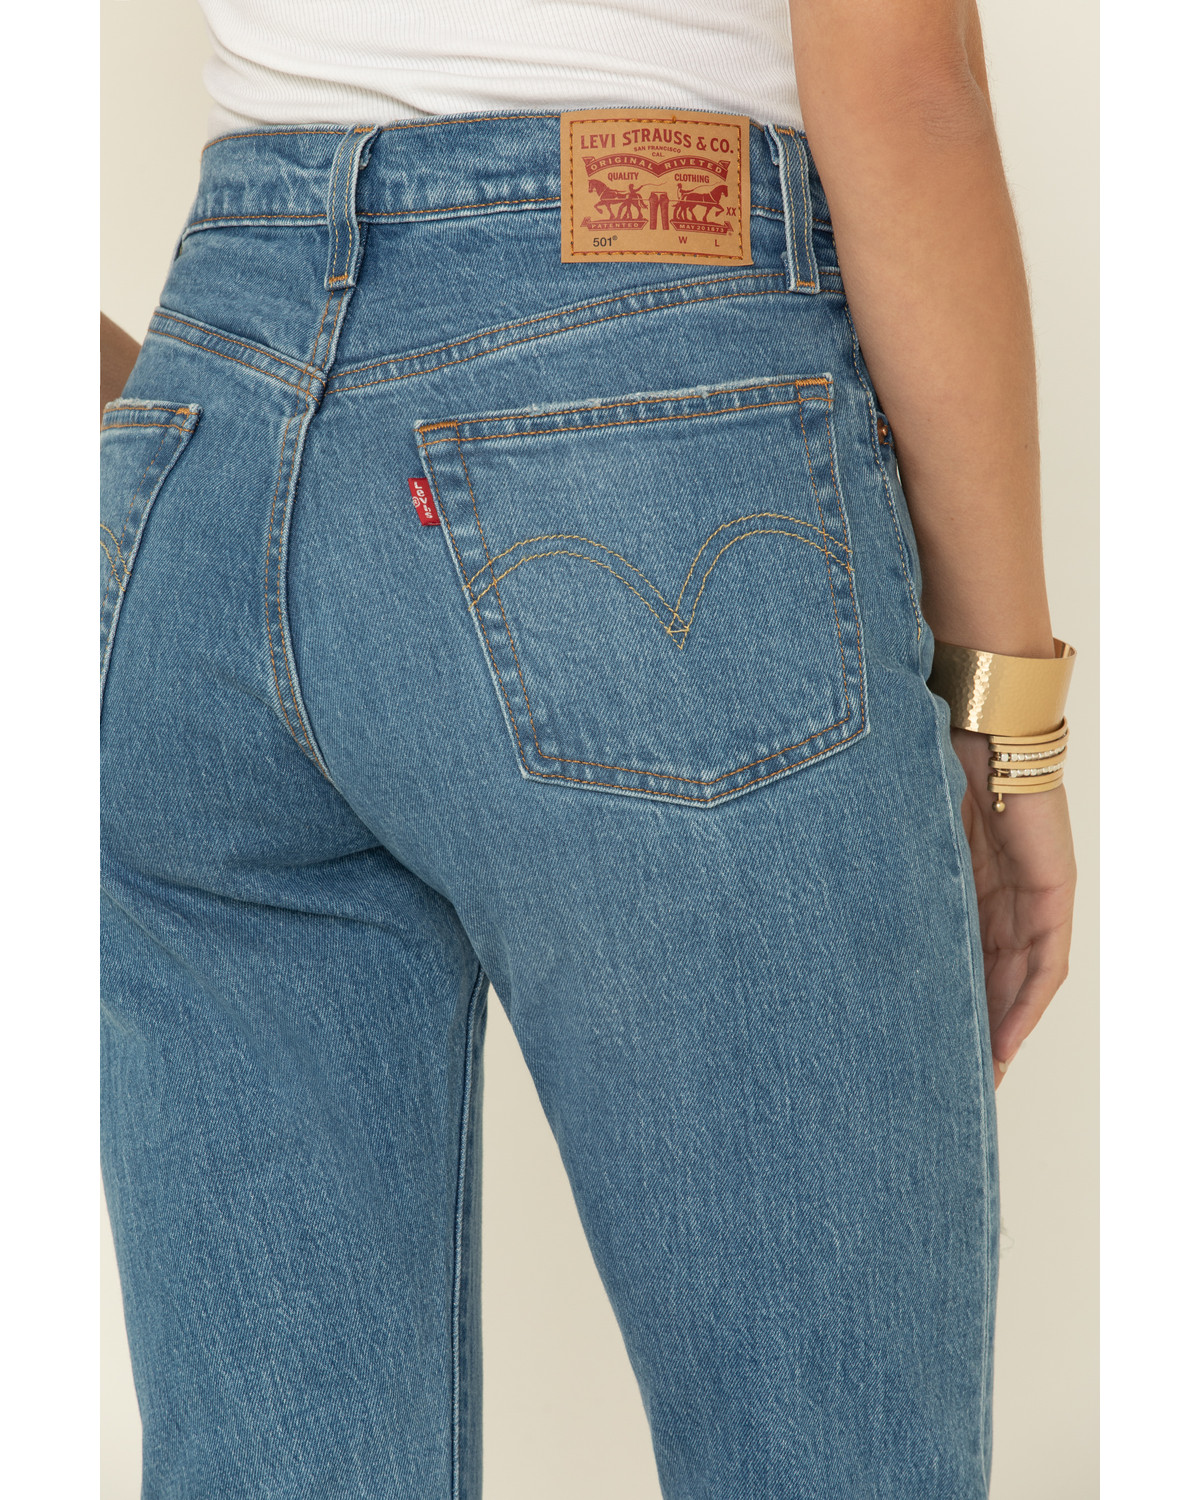 Levi’s Women's 501 Original Cropped Jeans - Country Outfitter